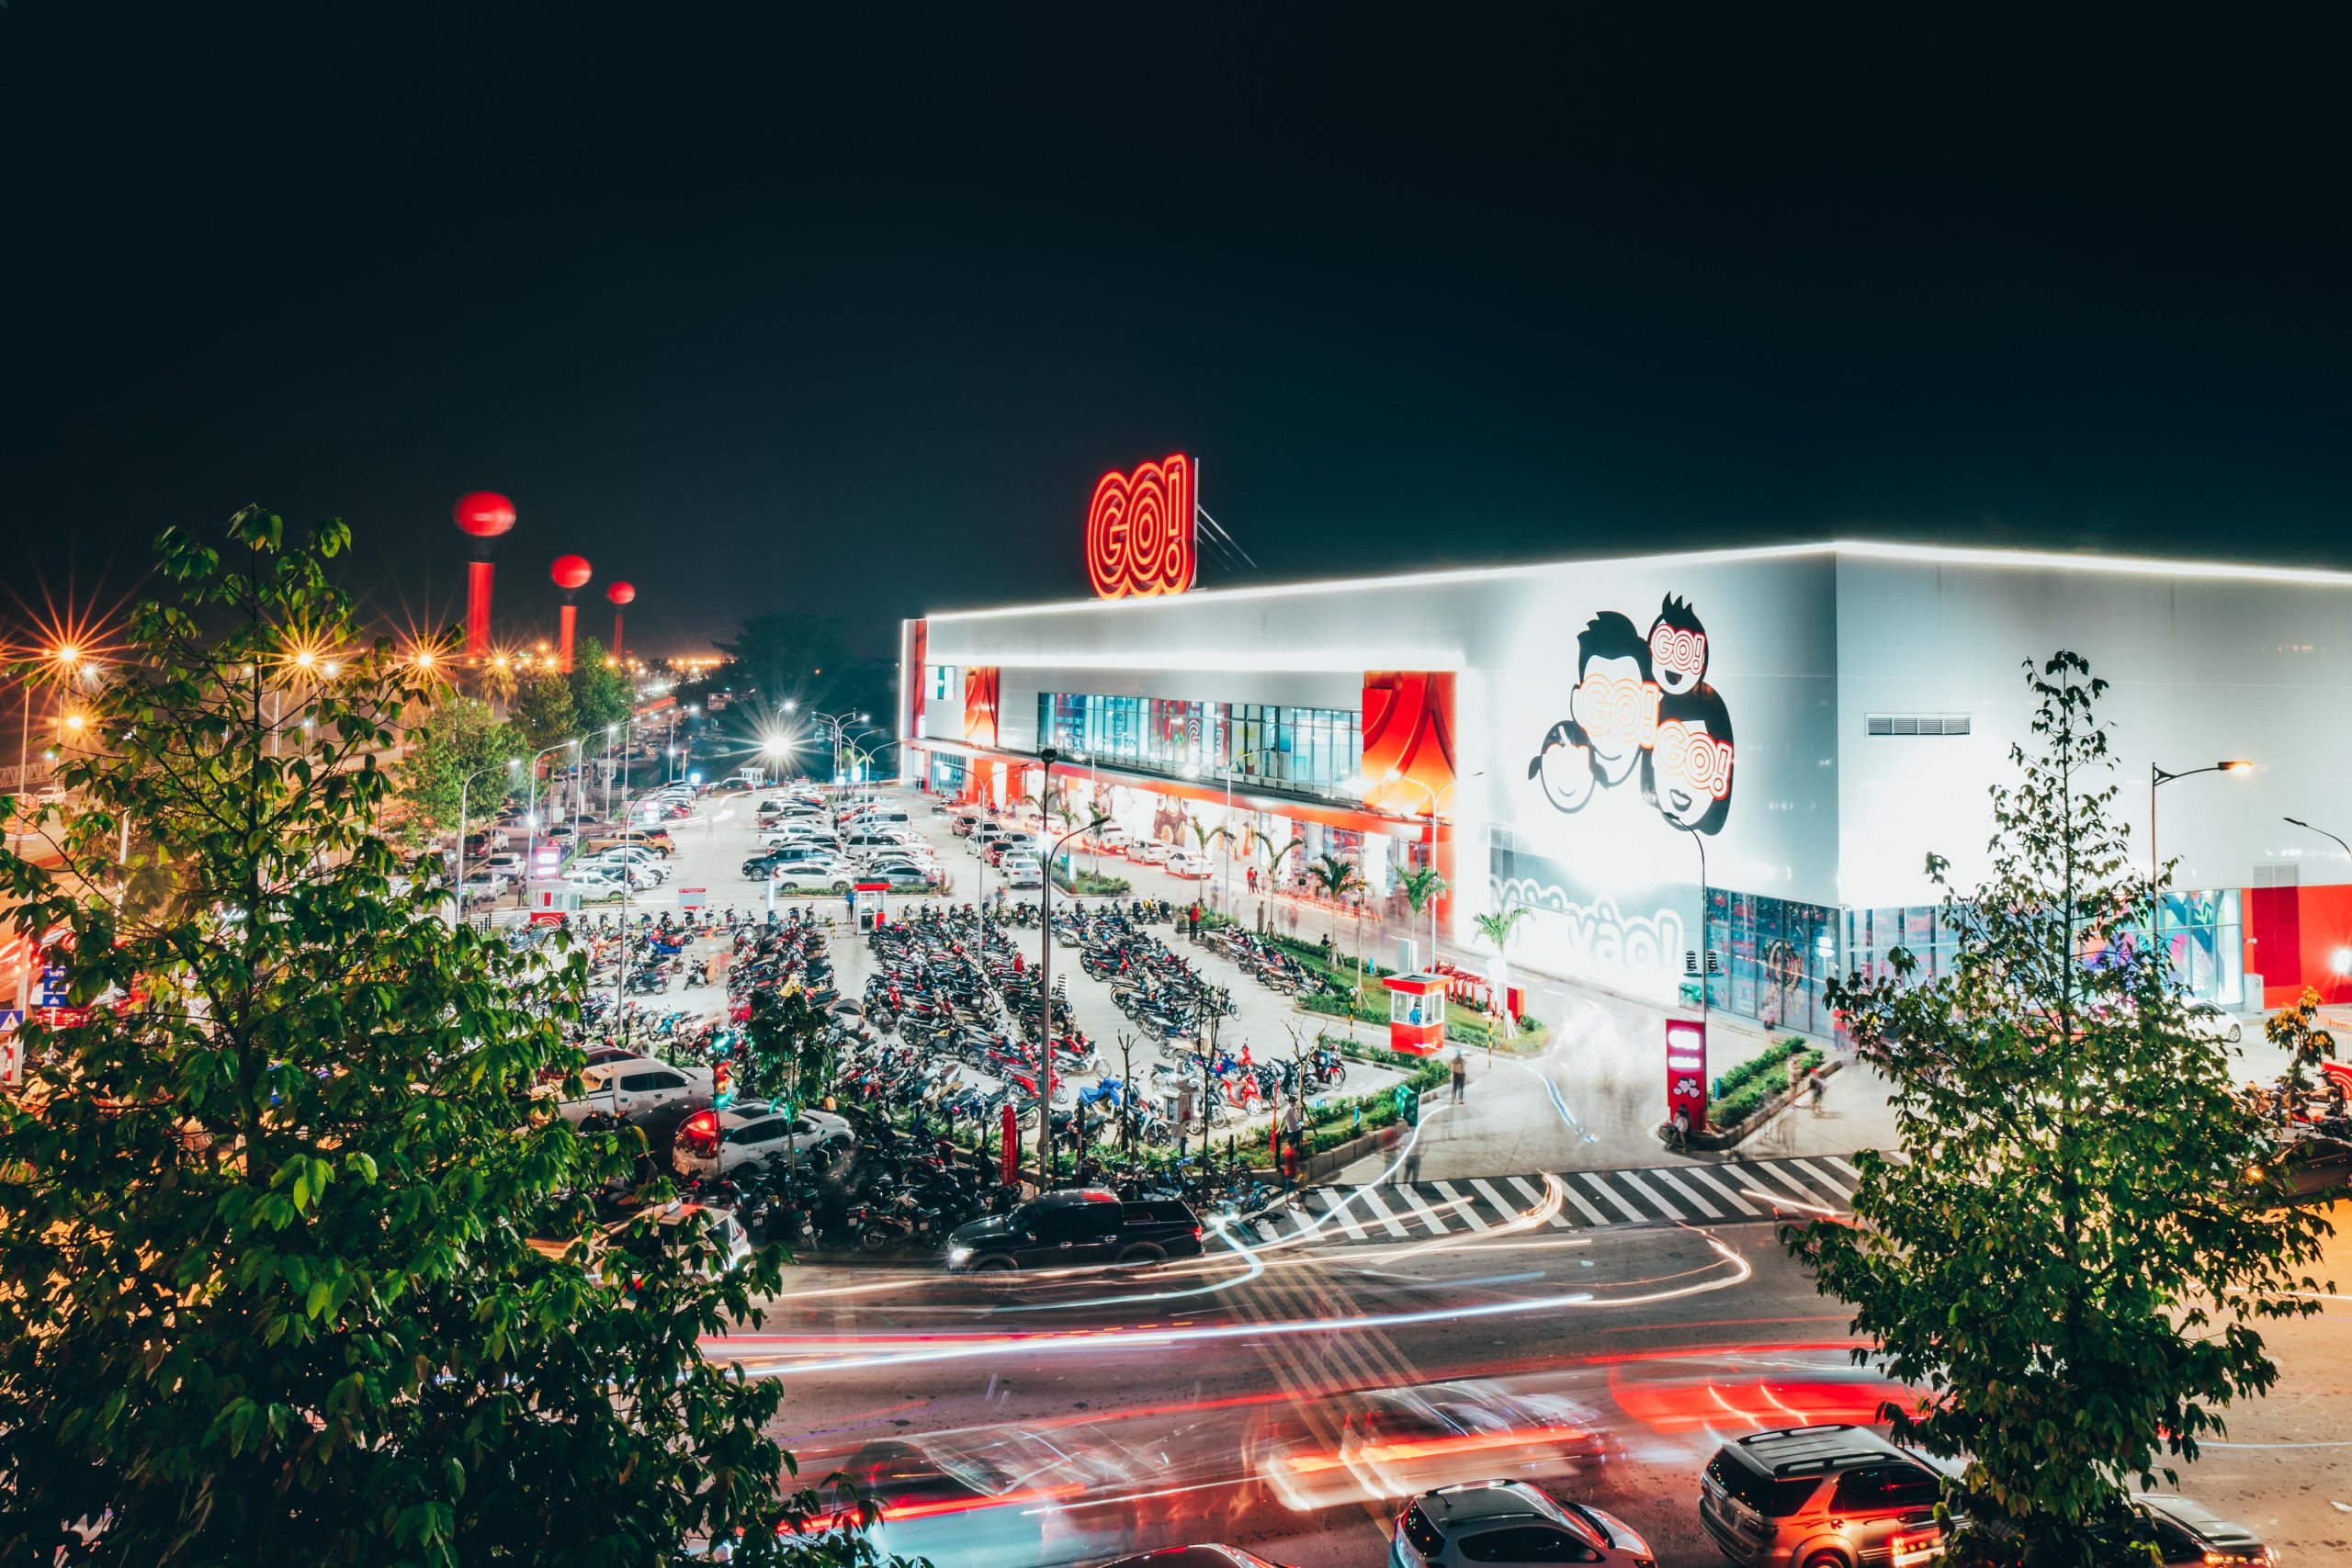 “GO! LAO CAI COMMERCIAL CENTER” – PROJECT INFORMATION